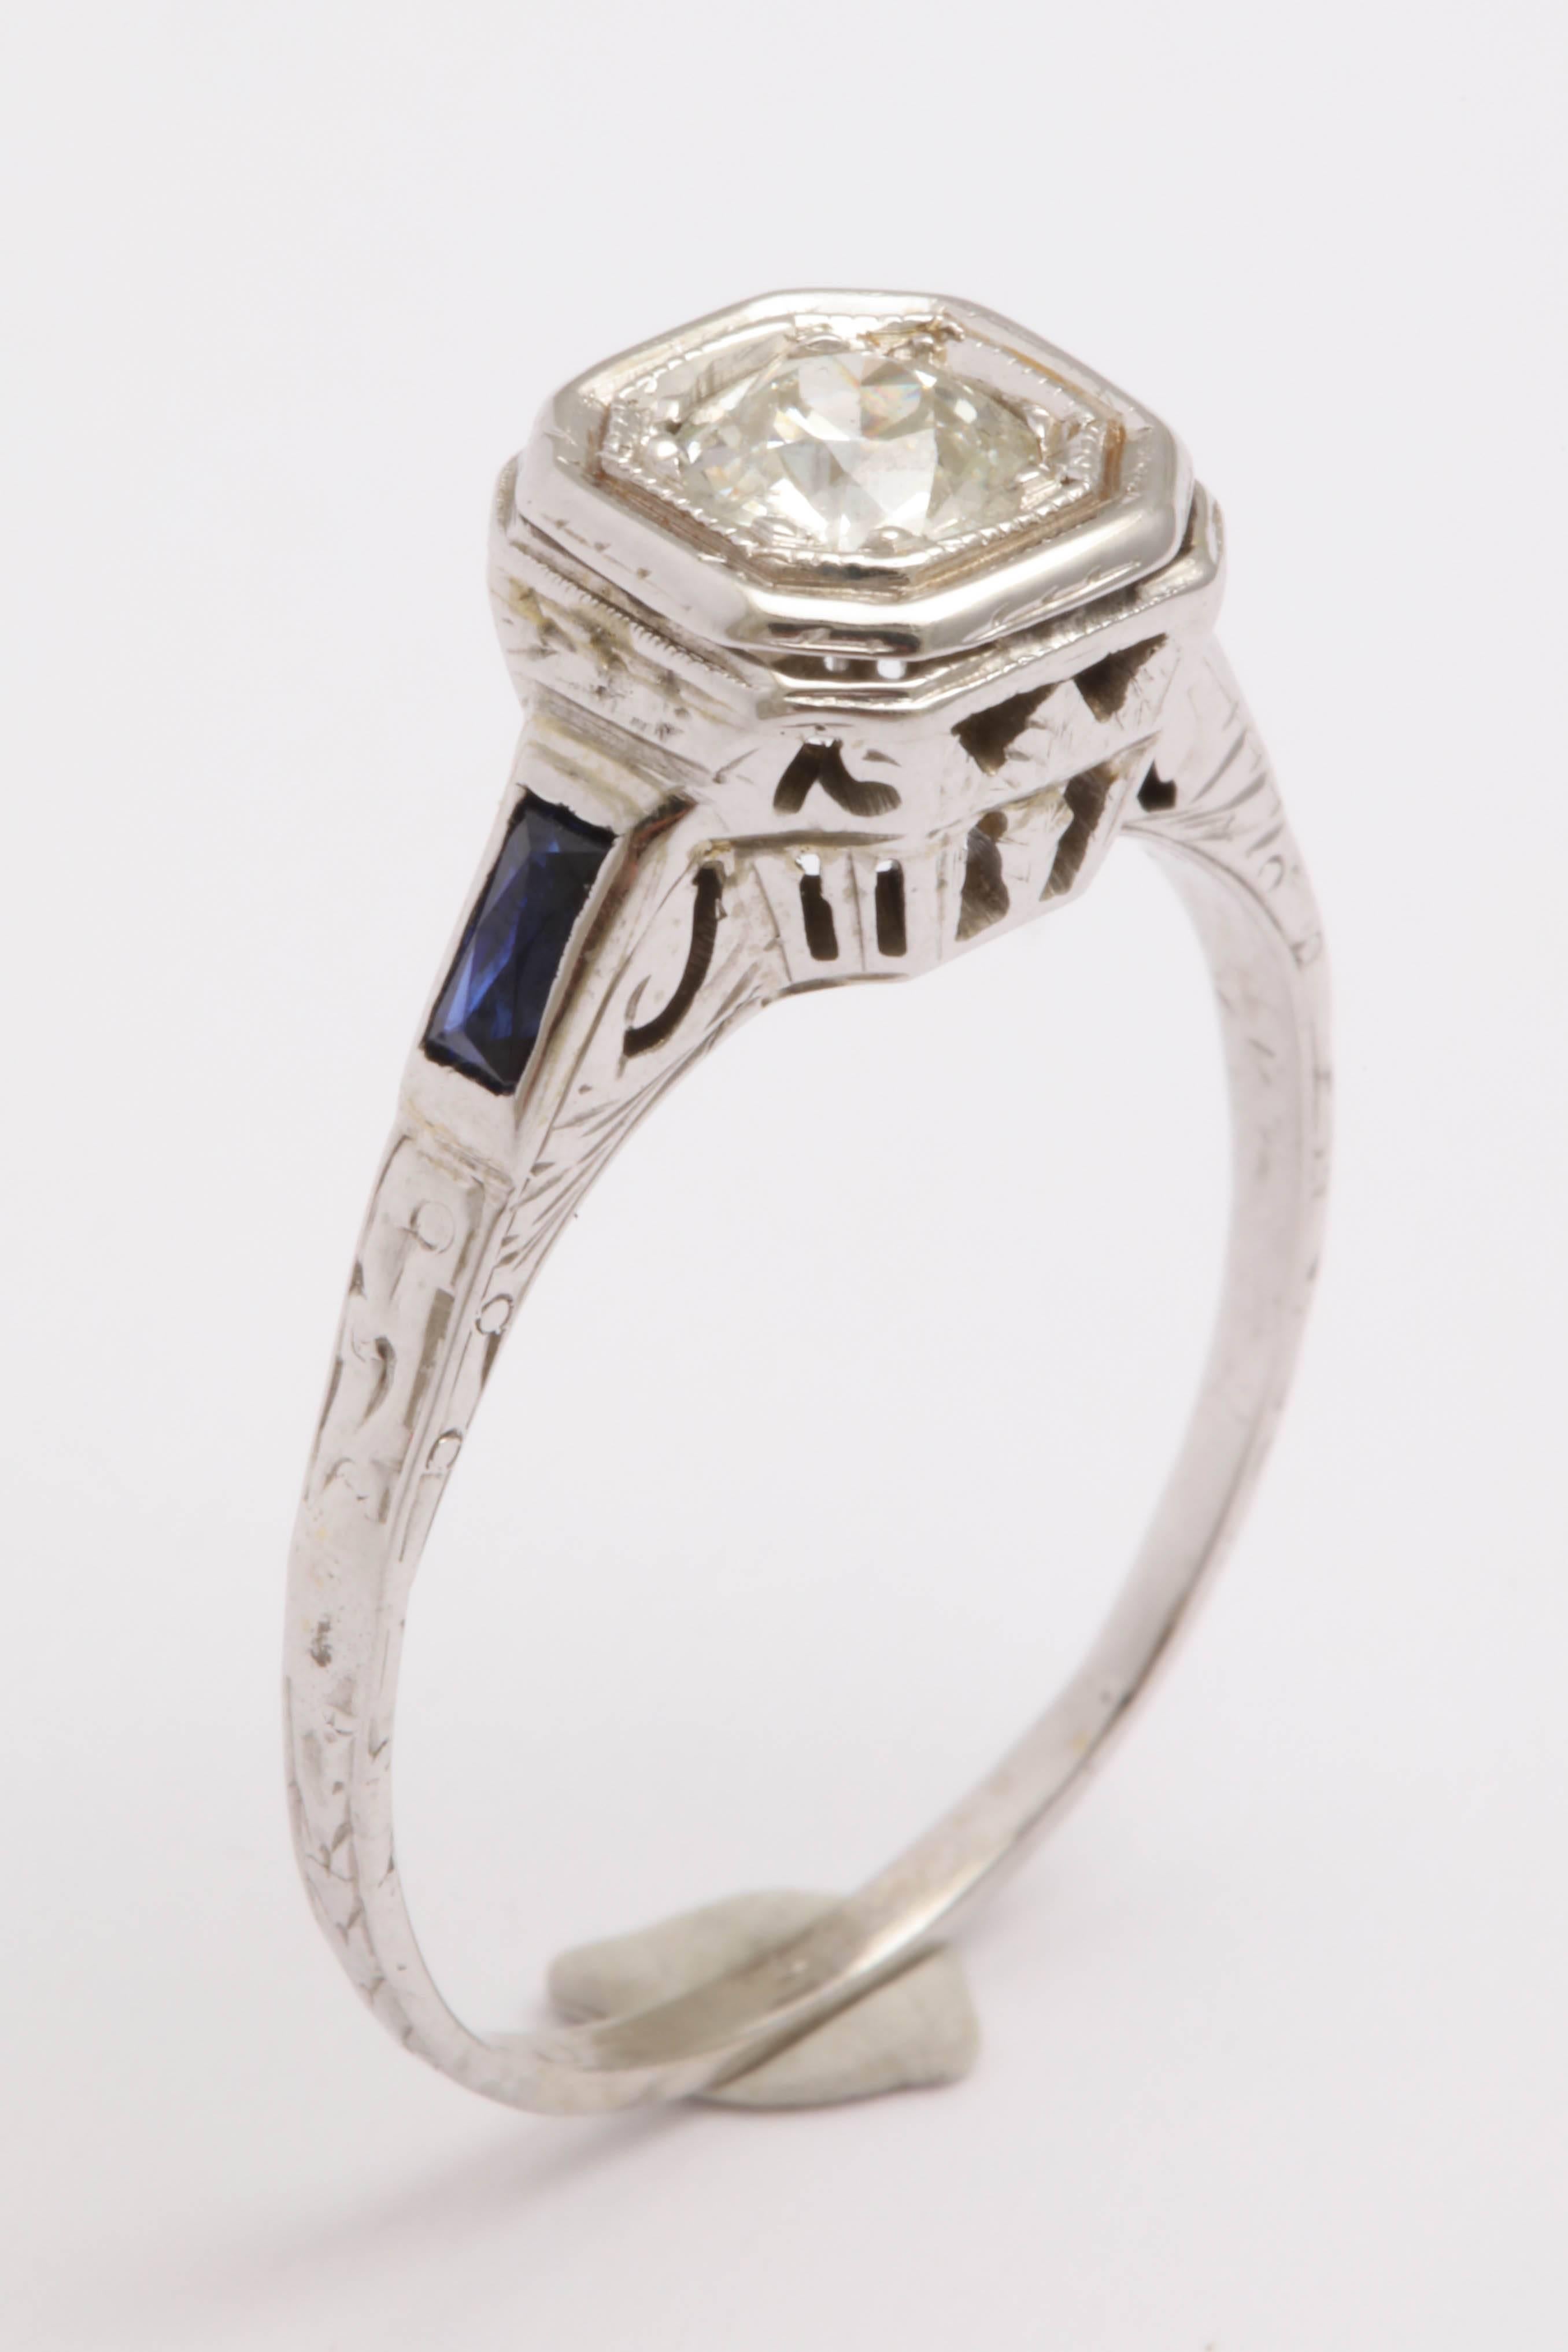 14K white gold diamond and sapphire Art Deco engagement ring. The sapphires are synthetic. Synthetic sapphires were quite popular at the time as the technology to make them had just come about. The center diamond is an Old European diamond set flush